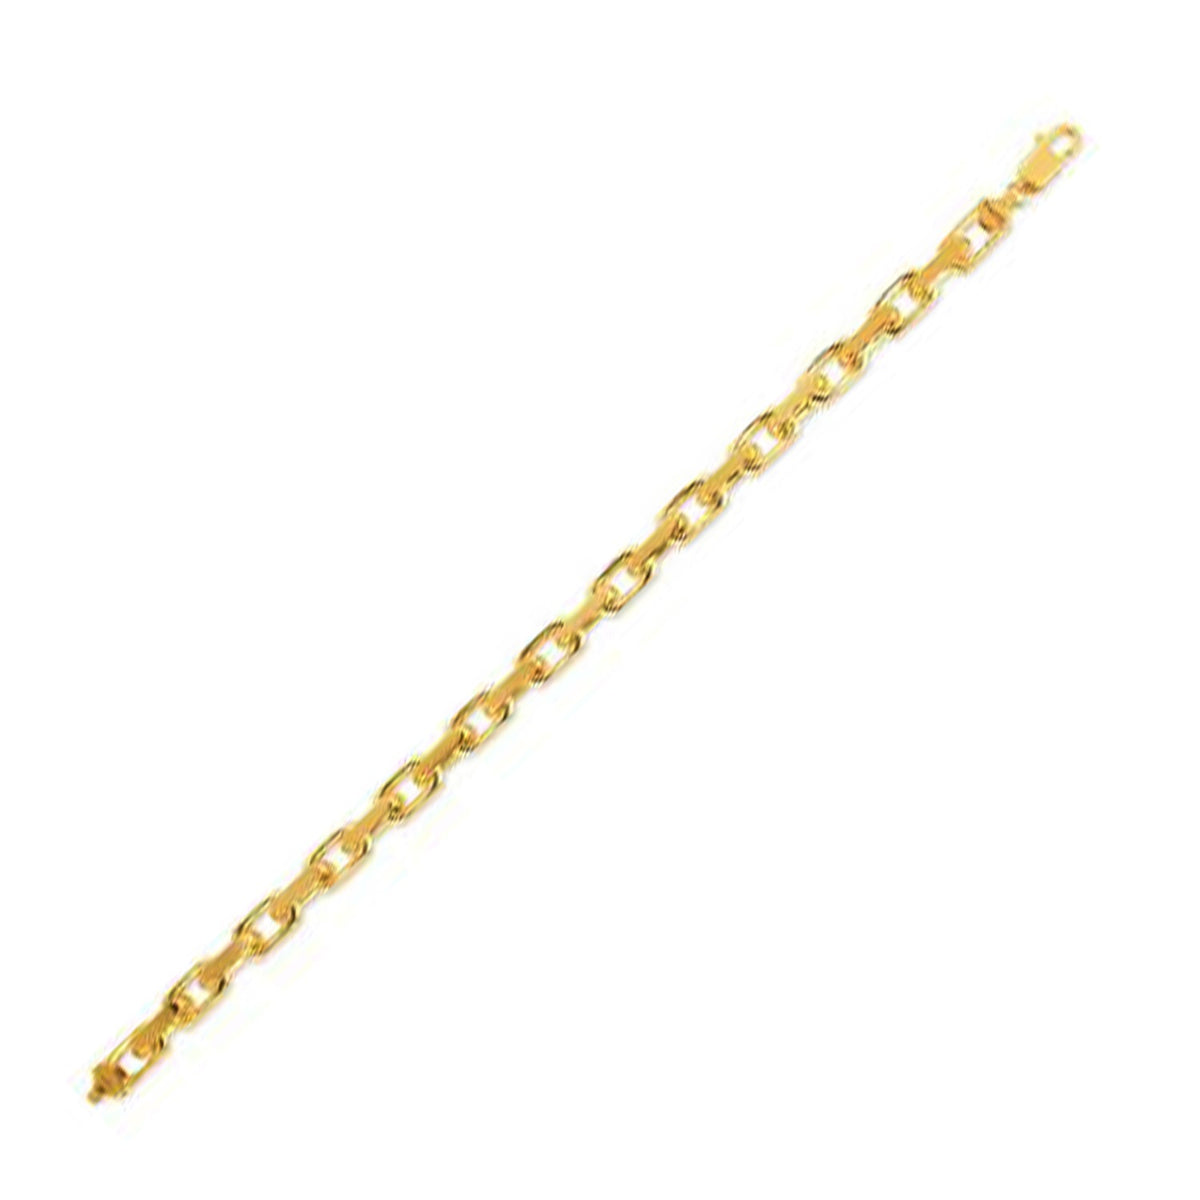 French Cable Link Chain - 14k Yellow Gold 6.10mm